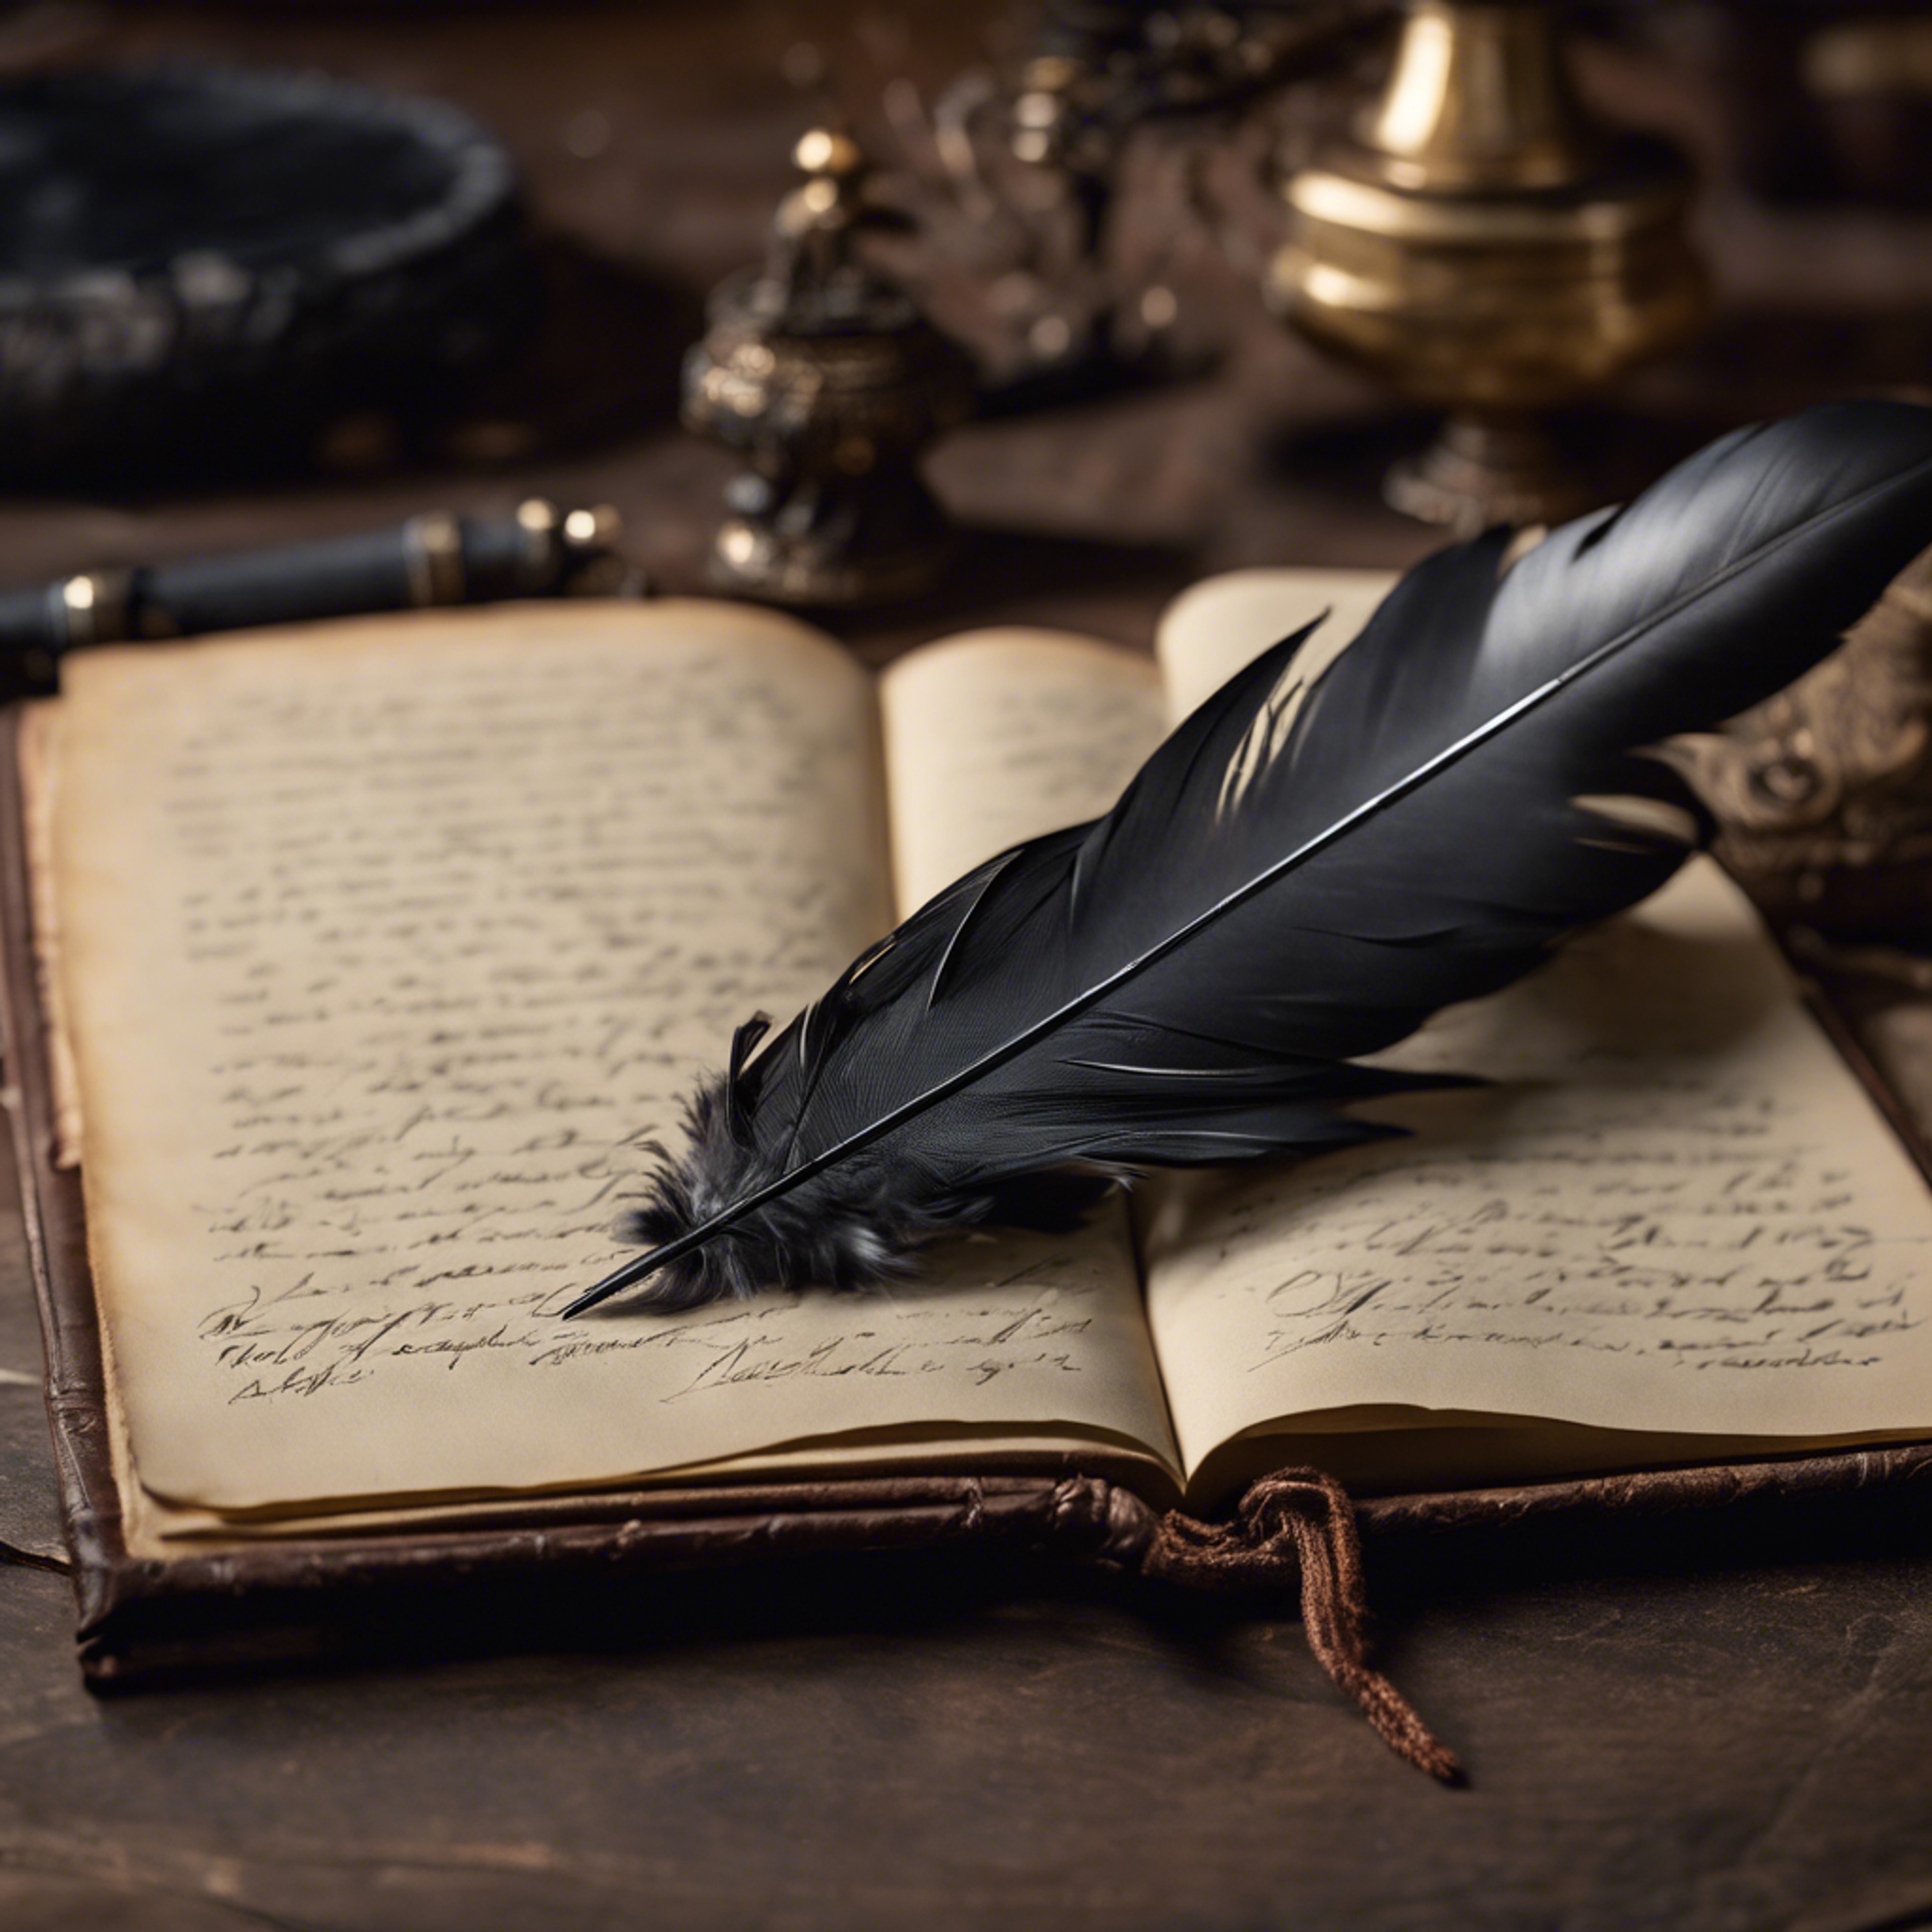 A black feather quill pen poised to write in an antique leather-bound journal. Tapeta[1a576fd5c1f949af9941]